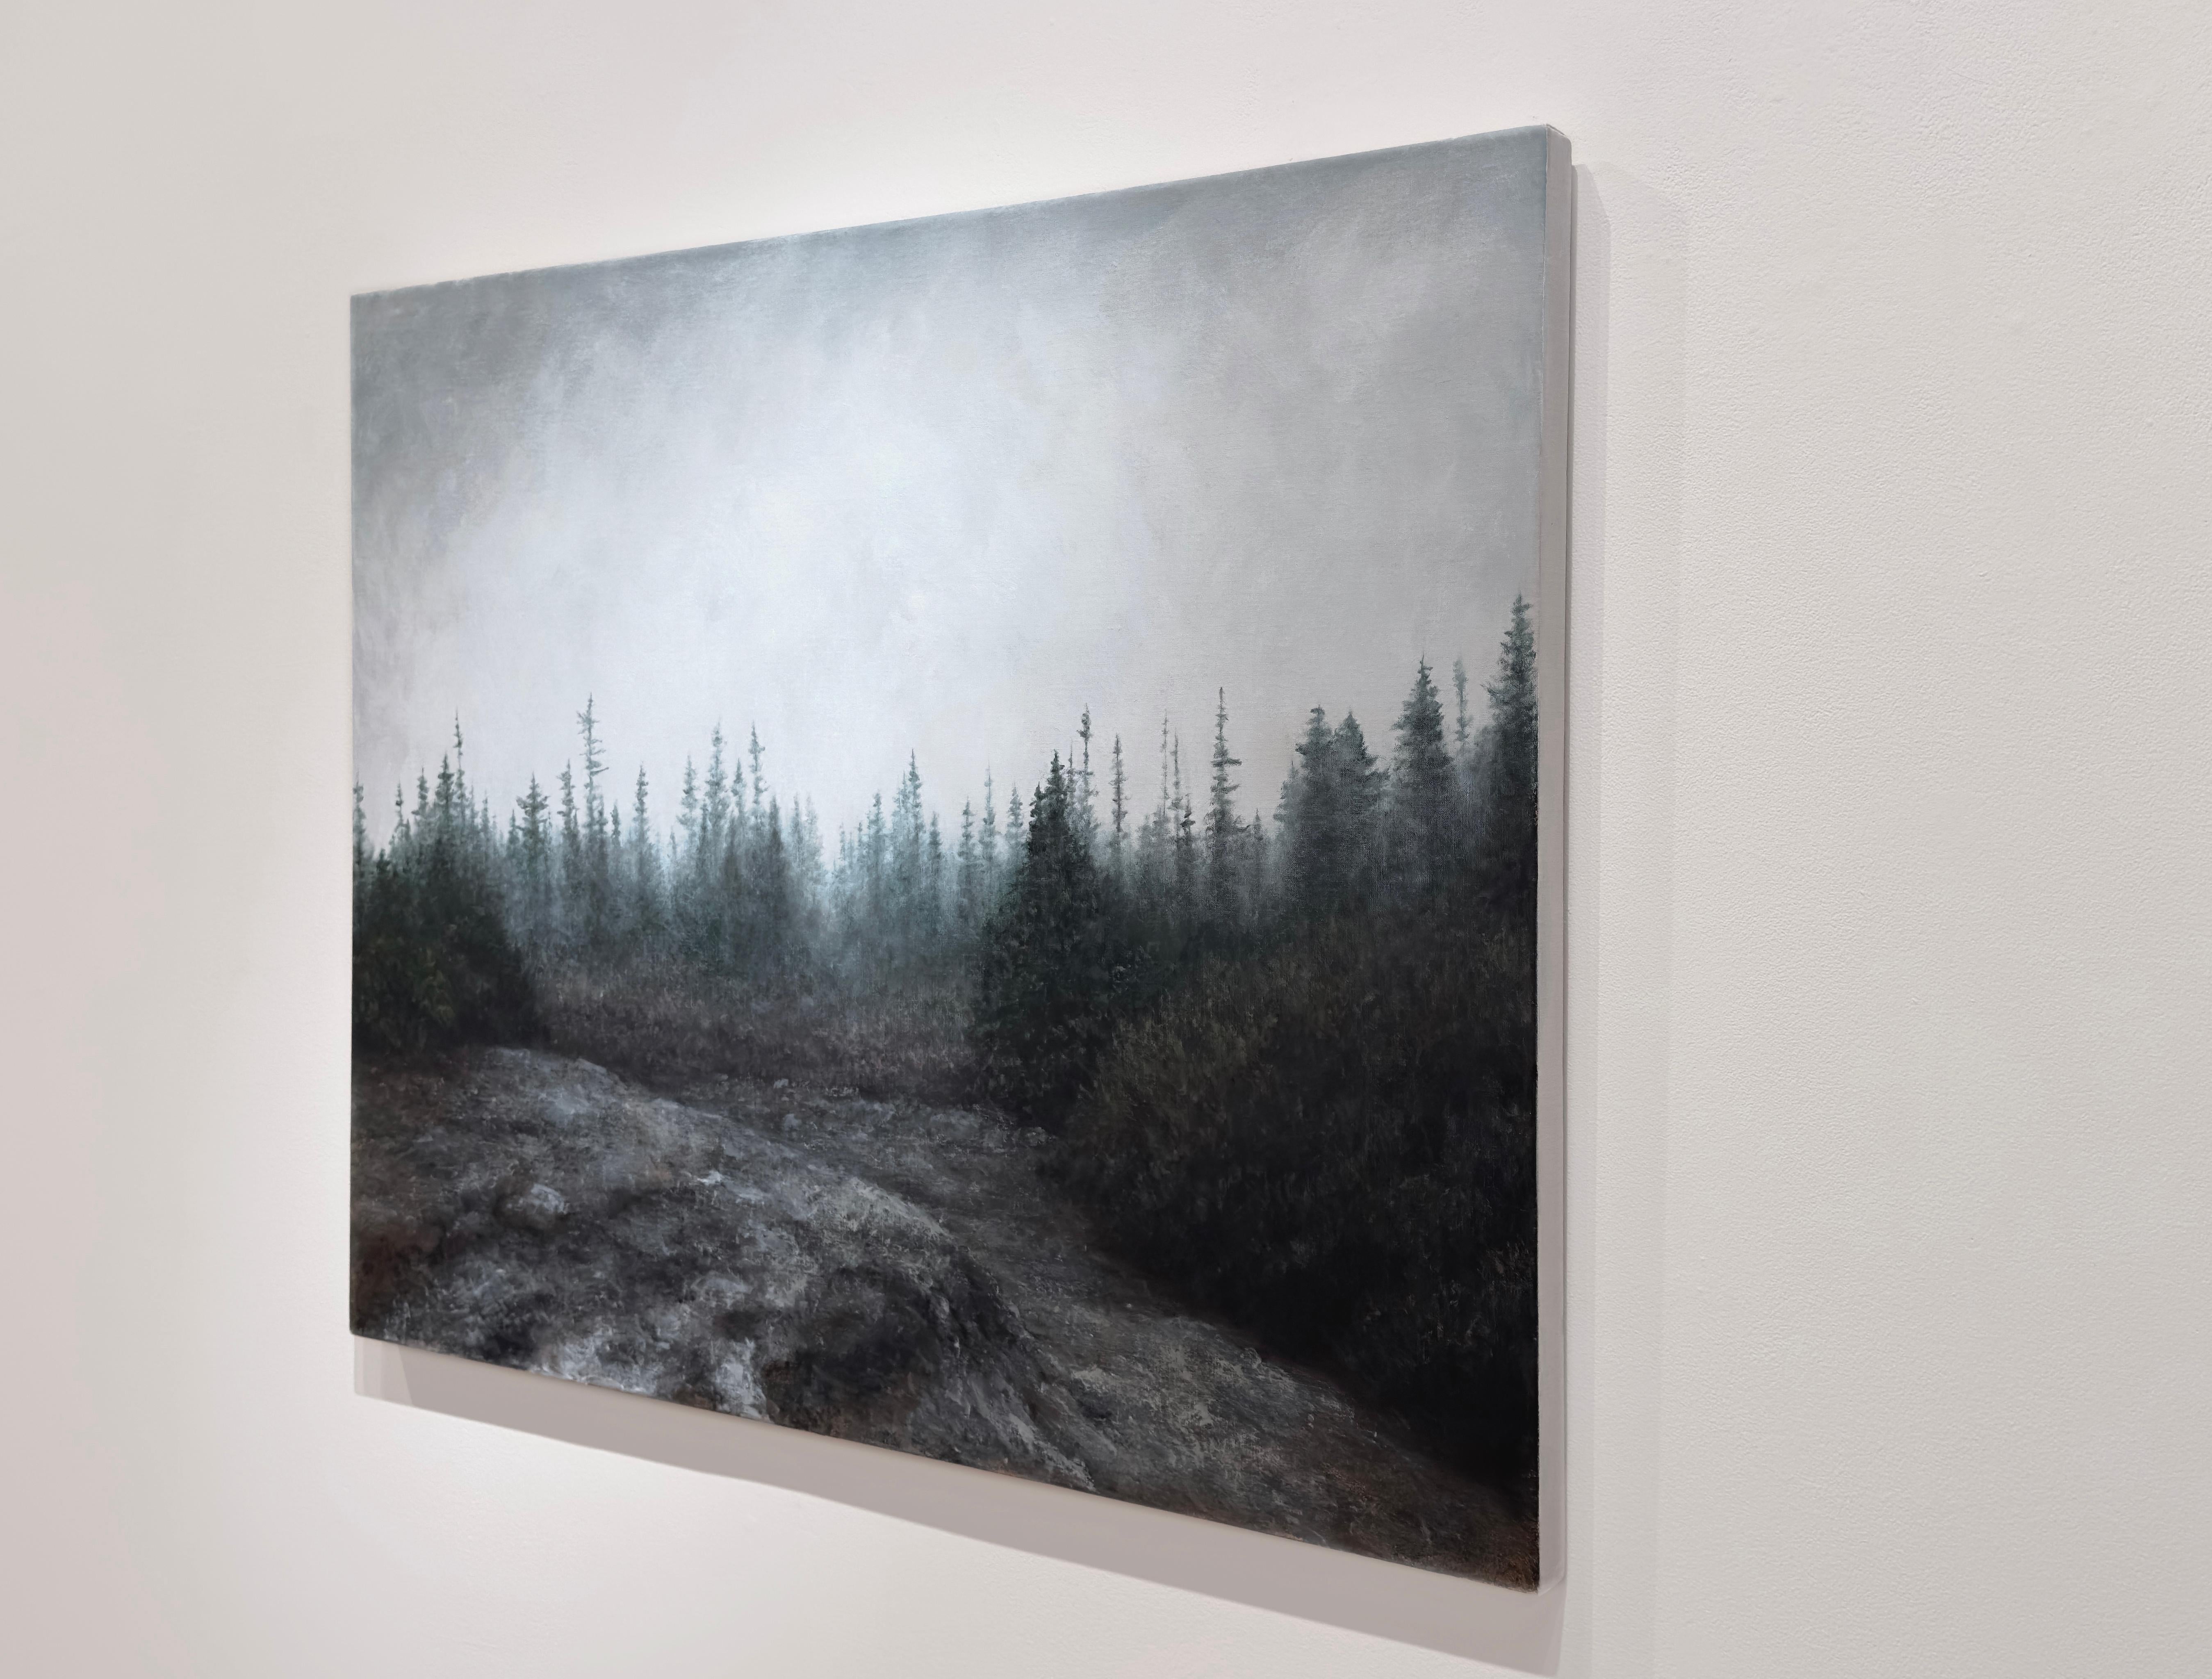 WHEN THE FOG LIFTED - Realism / Dark Landscape / Natural World  - Contemporary Painting by Lisa Lebofsky